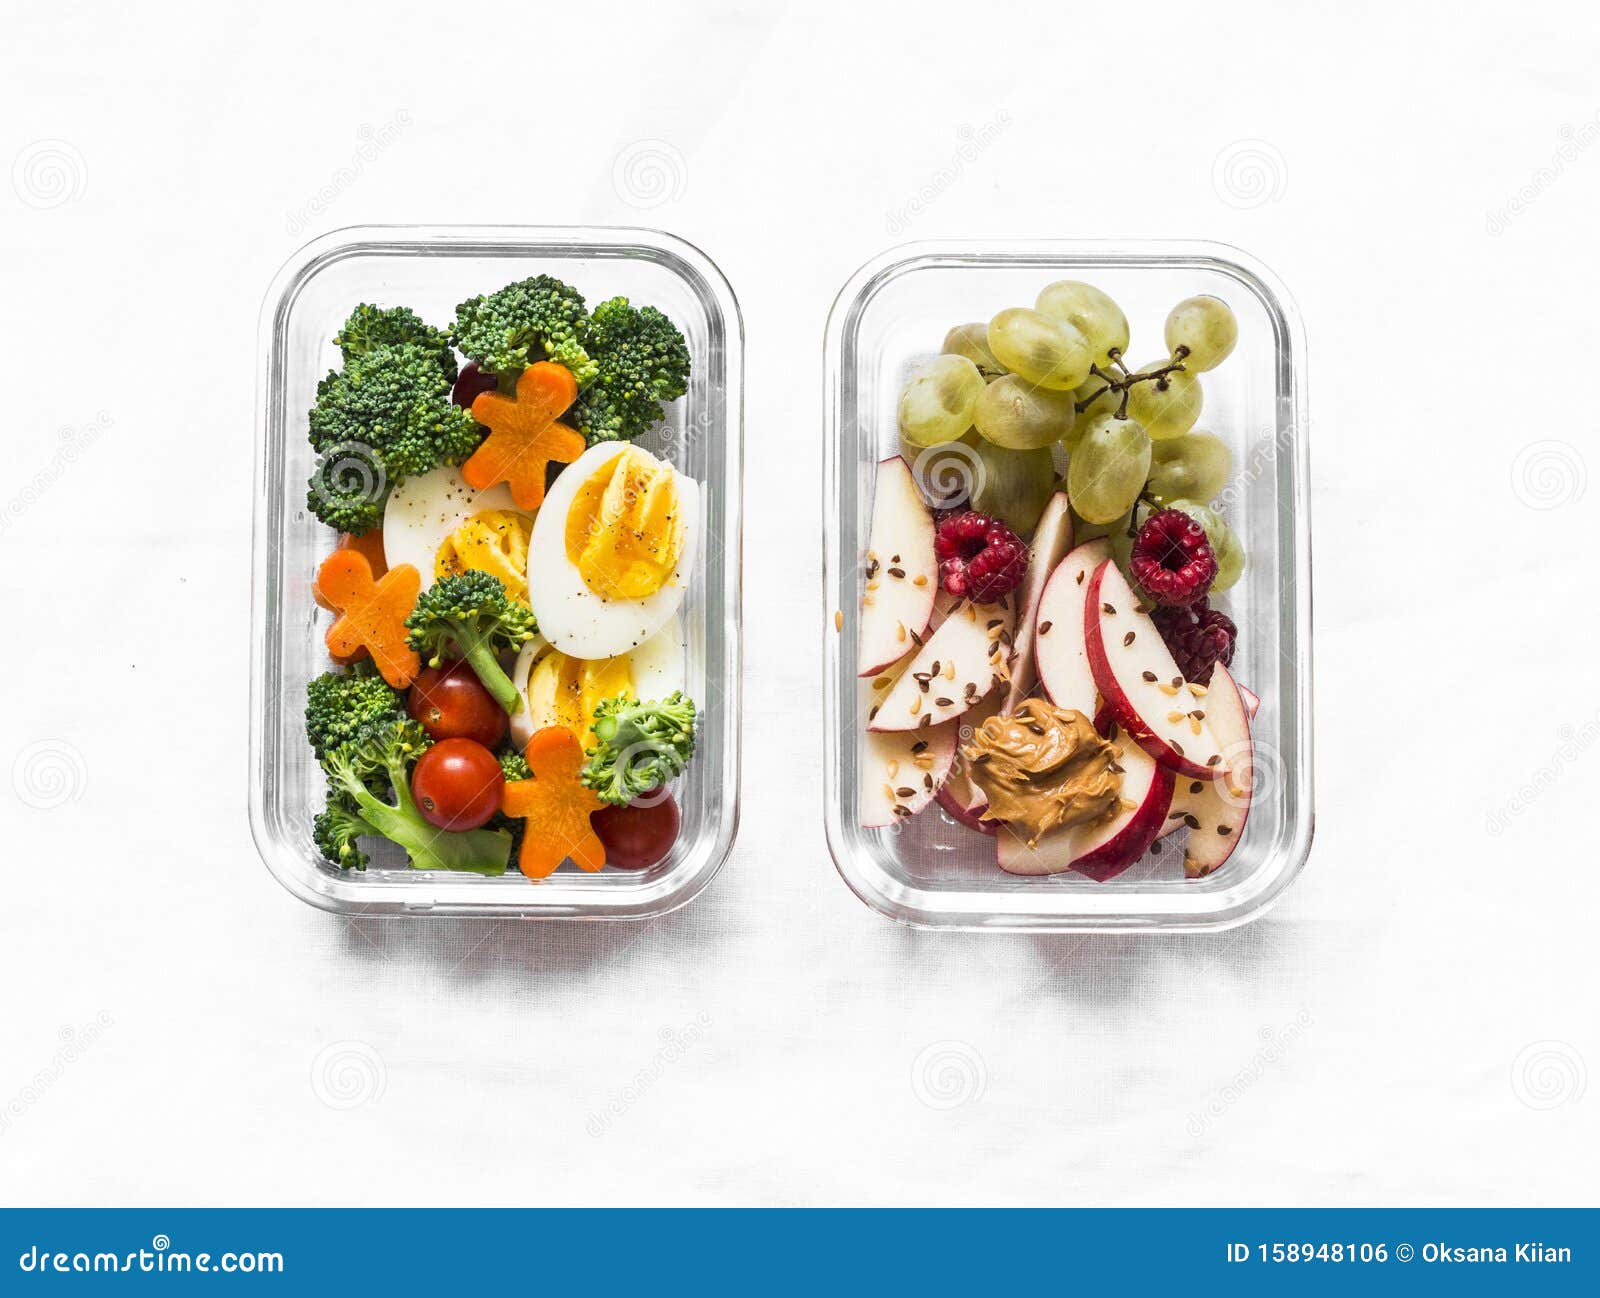 healthy diet snack, breakfast lunch box on light background, top view. boiled egg, fresh vegetables and fruits - tasty healthy